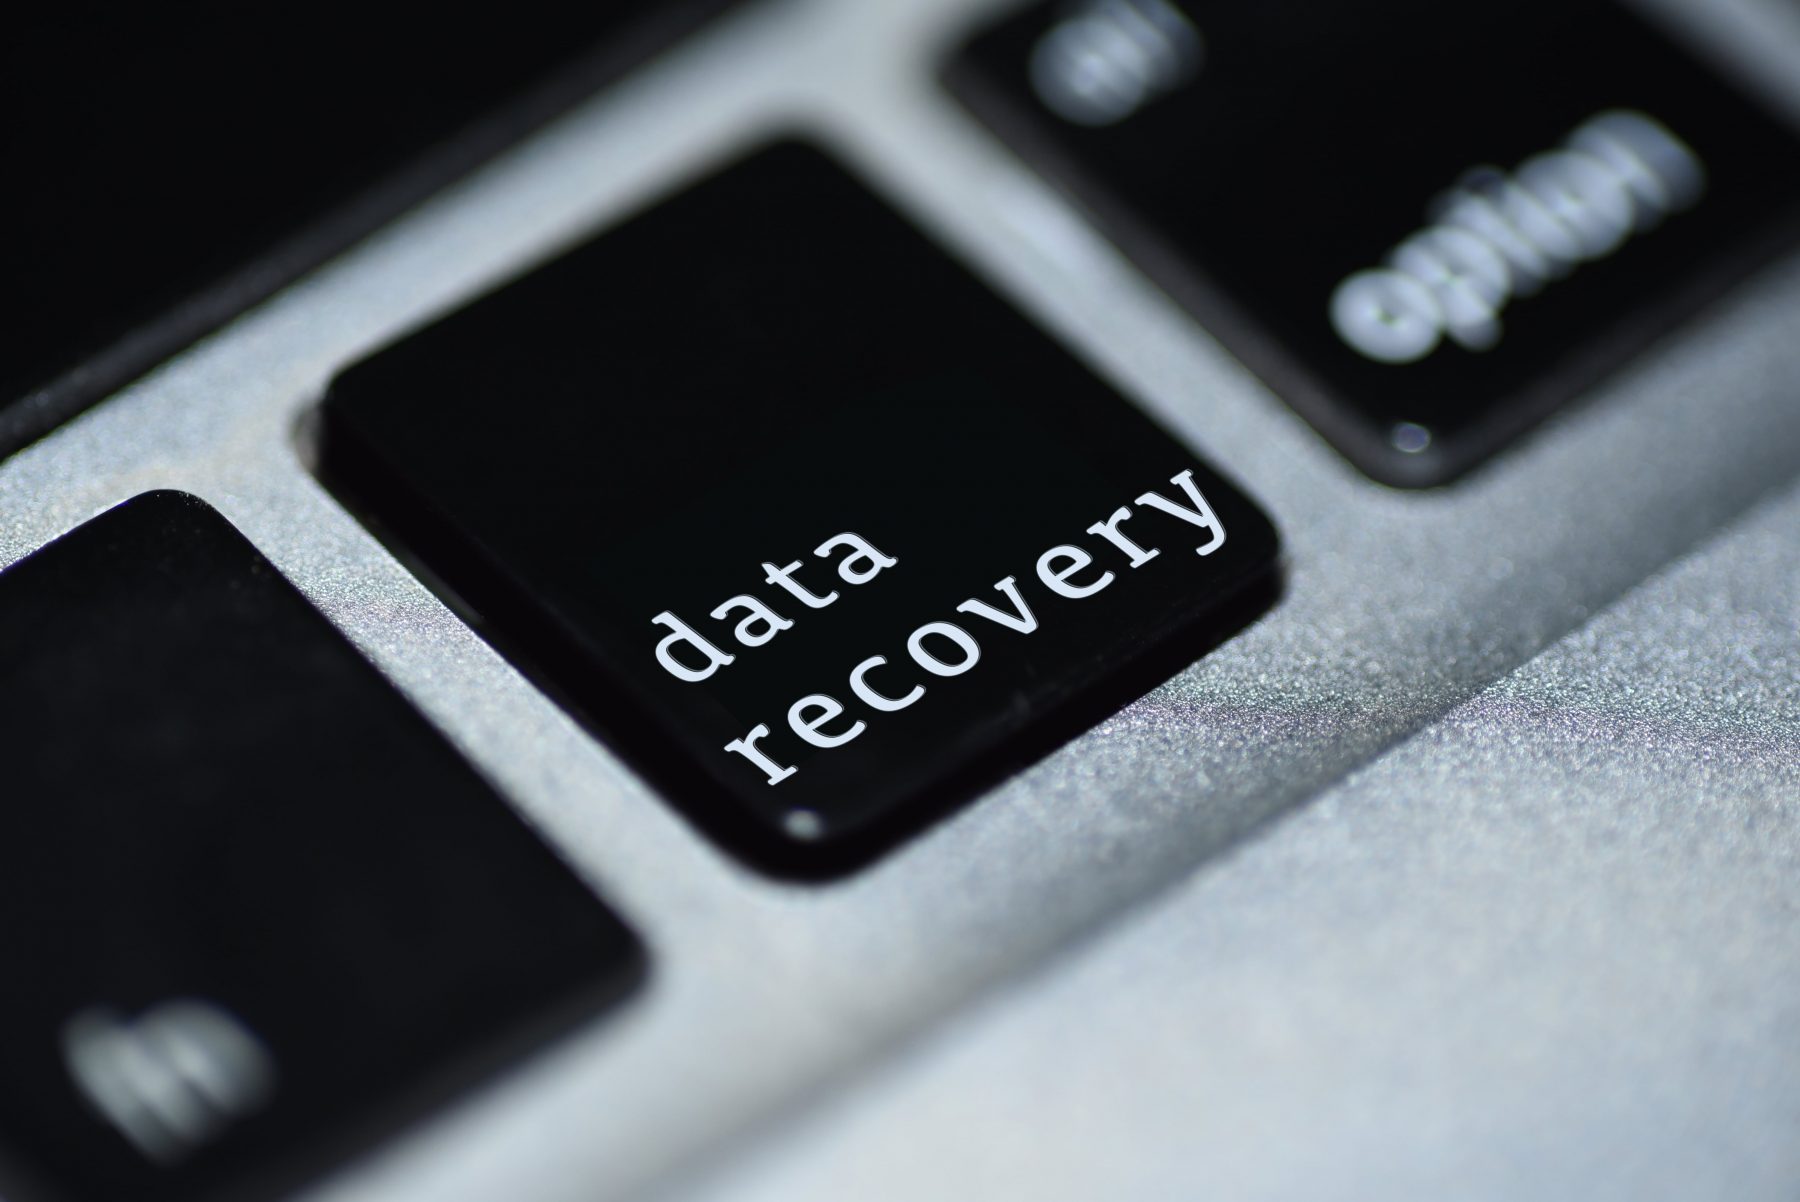 recover data from your cellphone